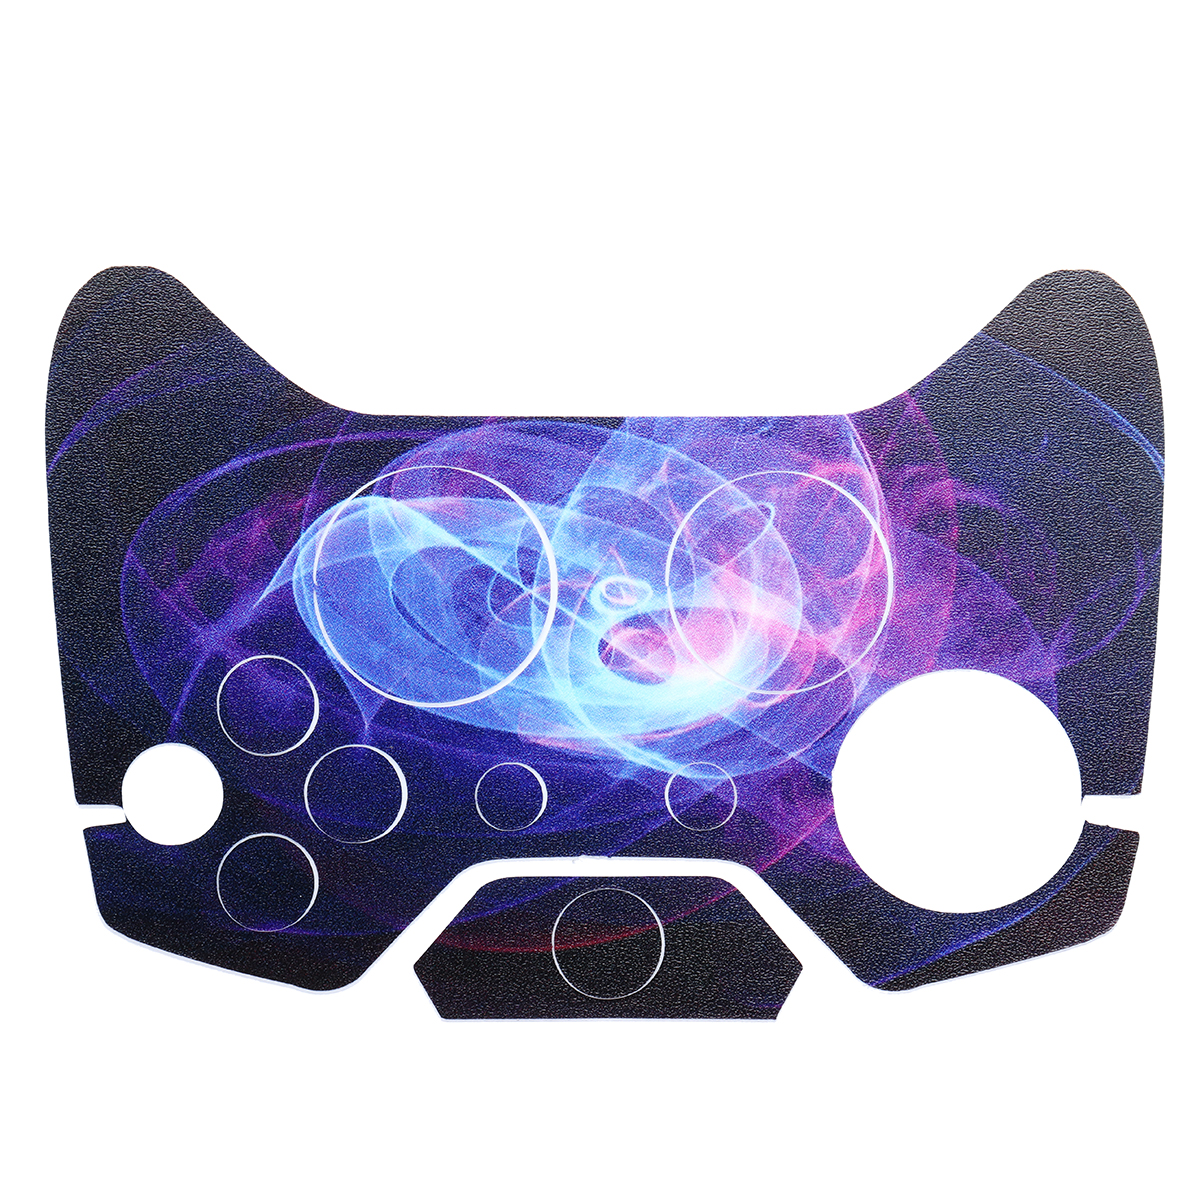 Purple Protective Vinyl Decal Skin Stickers Wrap Cover For Xbox One Game Console Game Controller Kinect 9